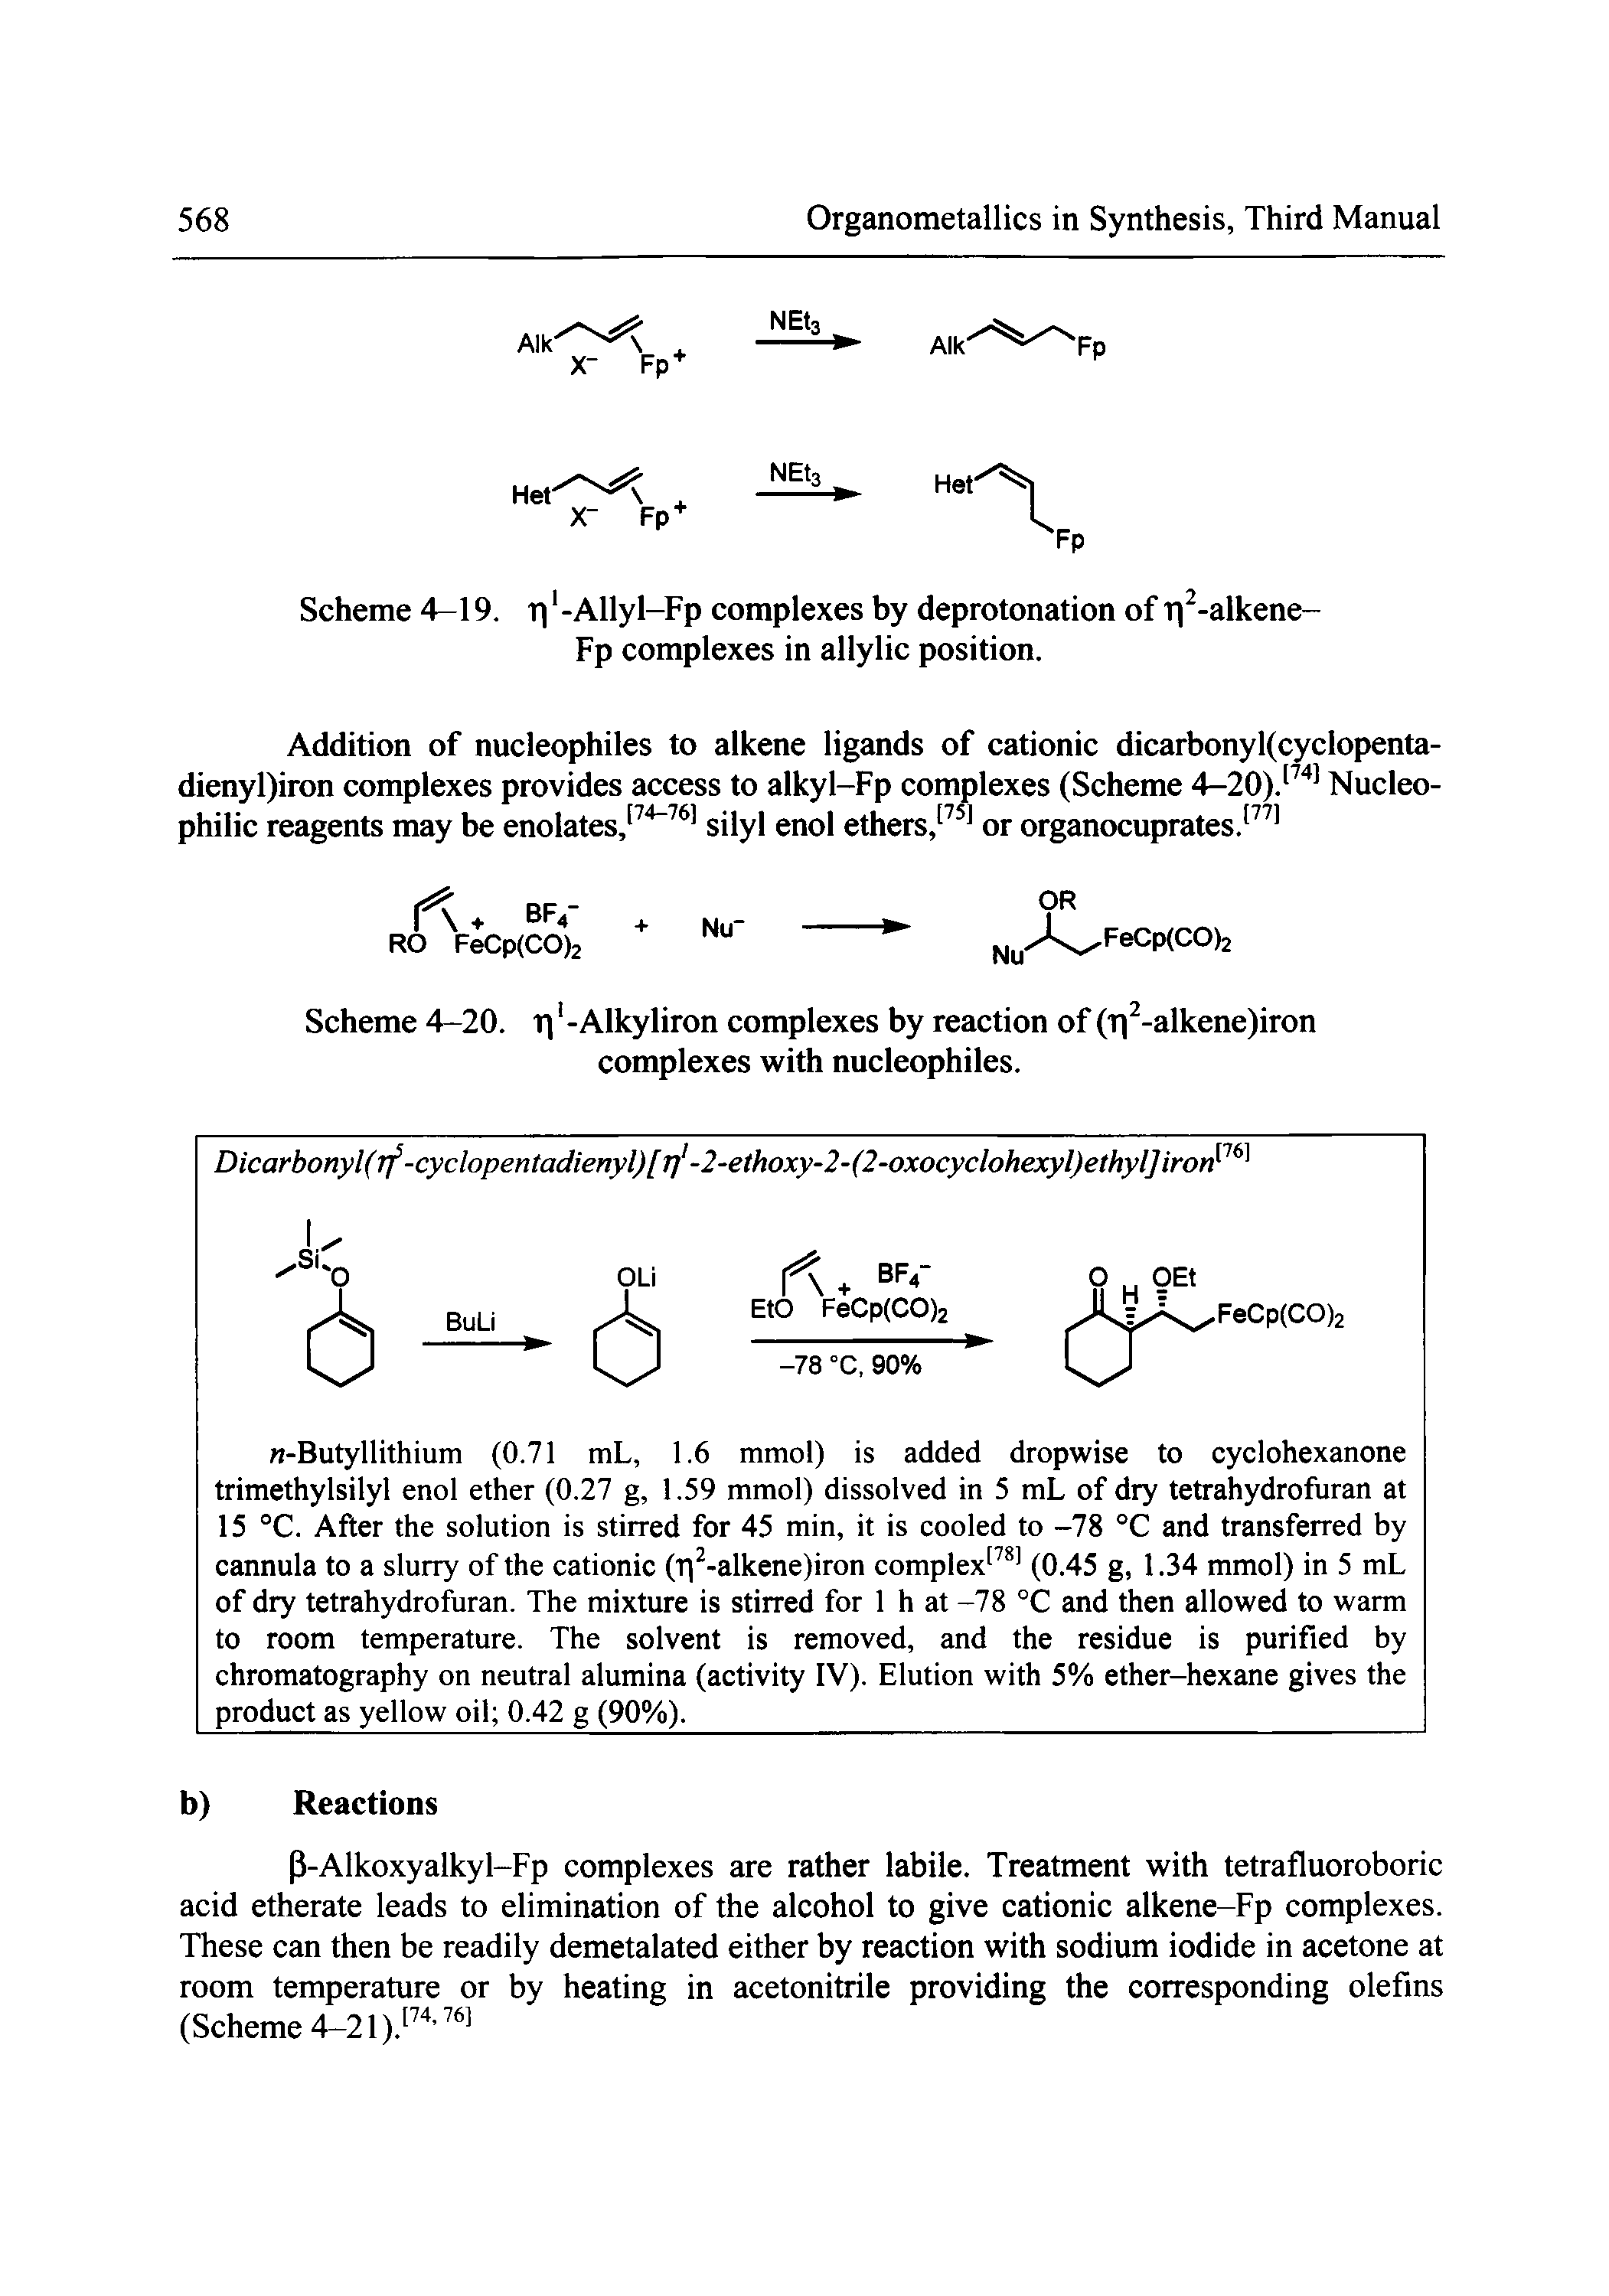 Scheme 4-20. Ti -Alkyliron complexes by reaction of (Ti -alkene)iron complexes with nucleophiles.